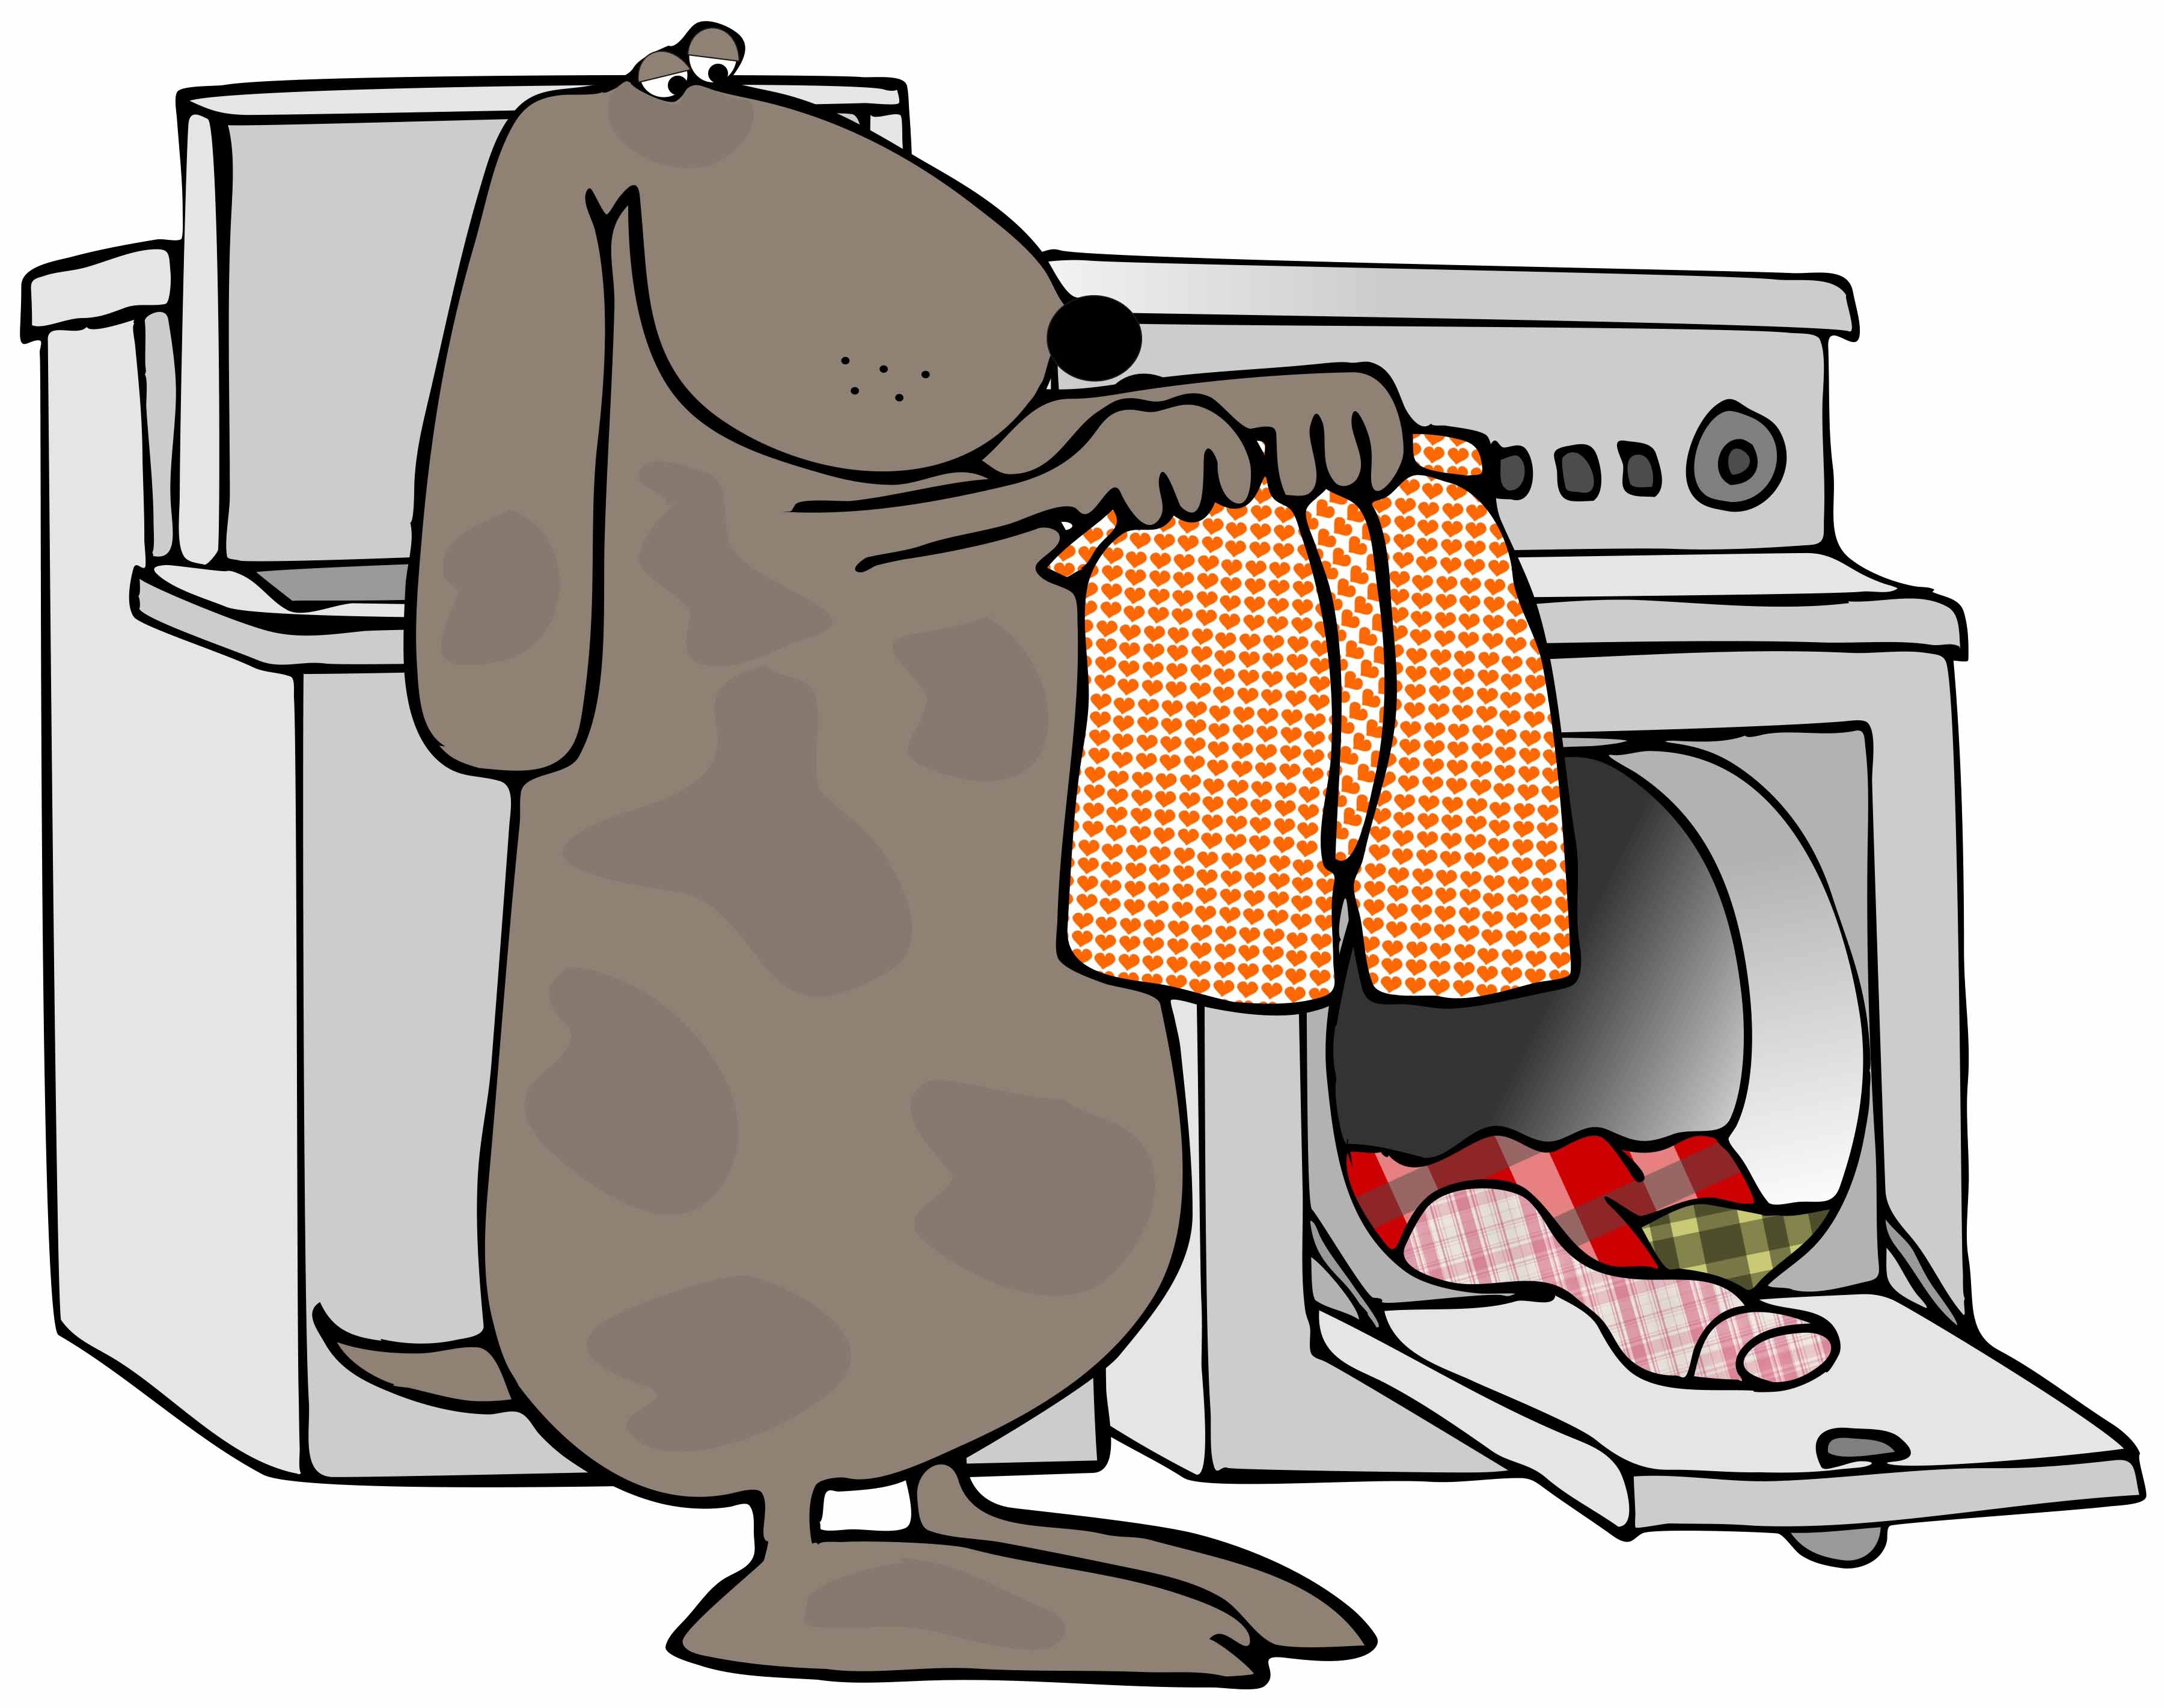 Simple Laundry Tip: Minimize Wrinkles in Clothes.